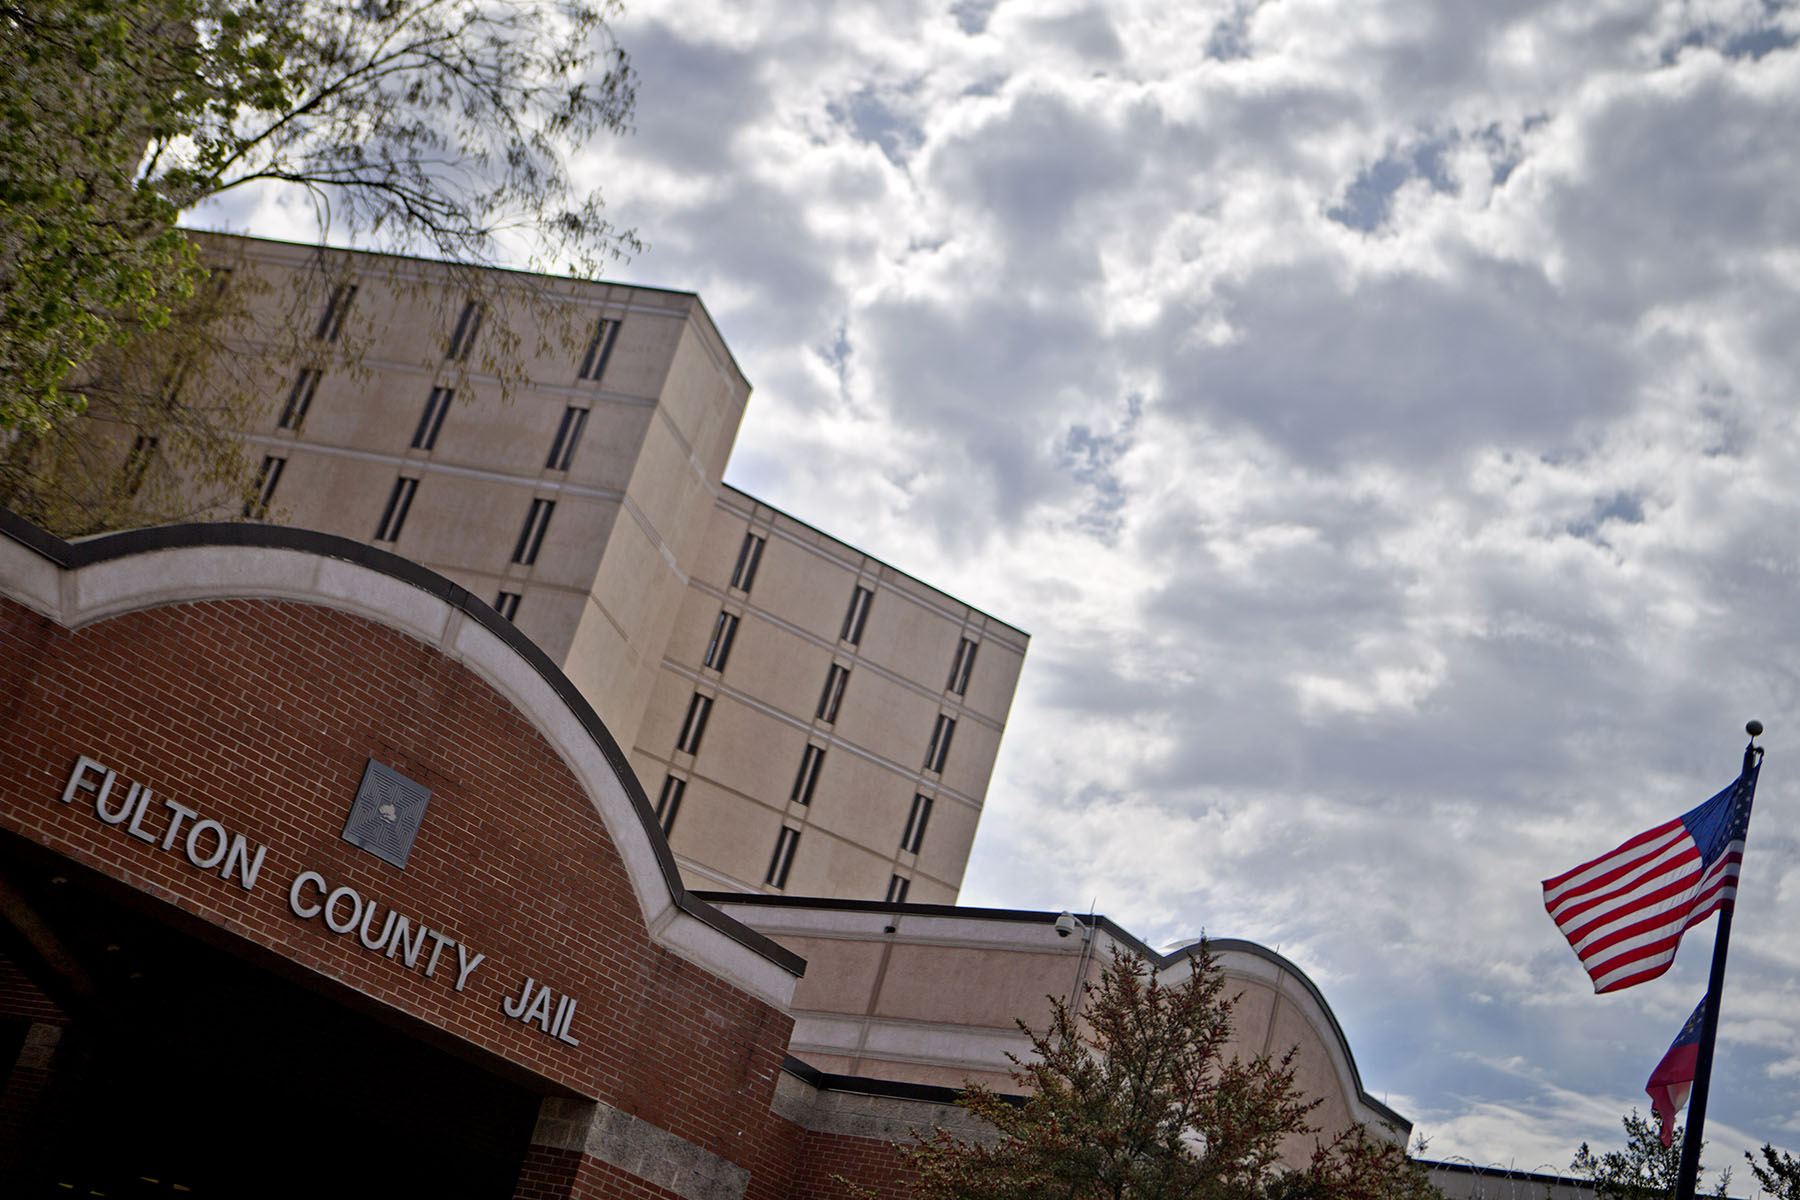 Fulton Country Jail is seen in Atlanta, Georgia. An American flag flies on the right side of the image.